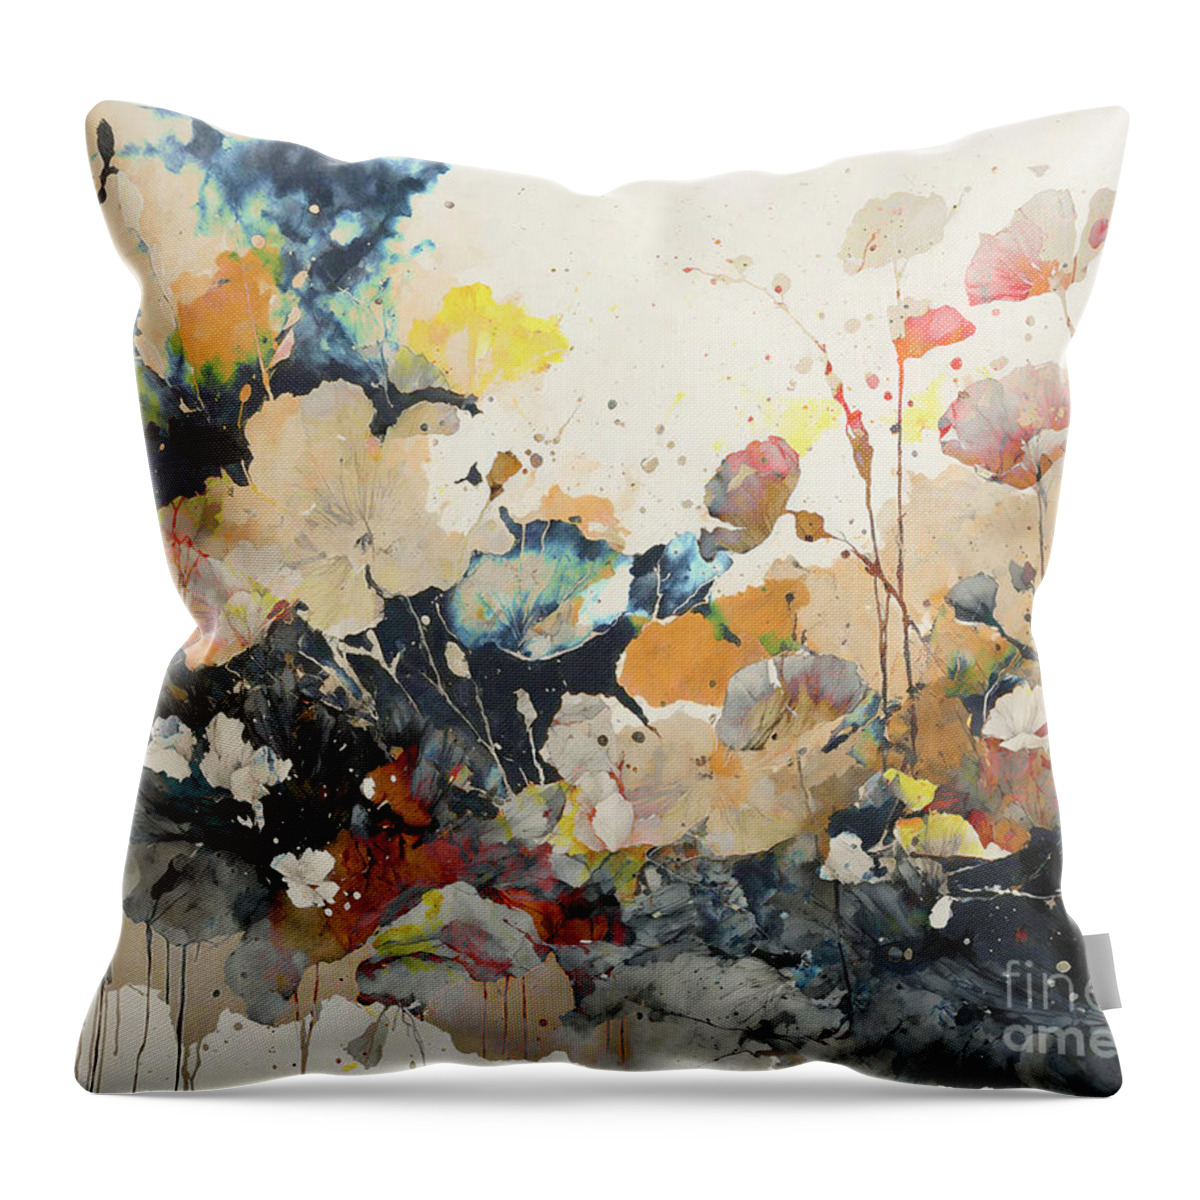 Muted Colors Throw Pillow featuring the digital art Colorful Watercolor Flowes by Deb Nakano